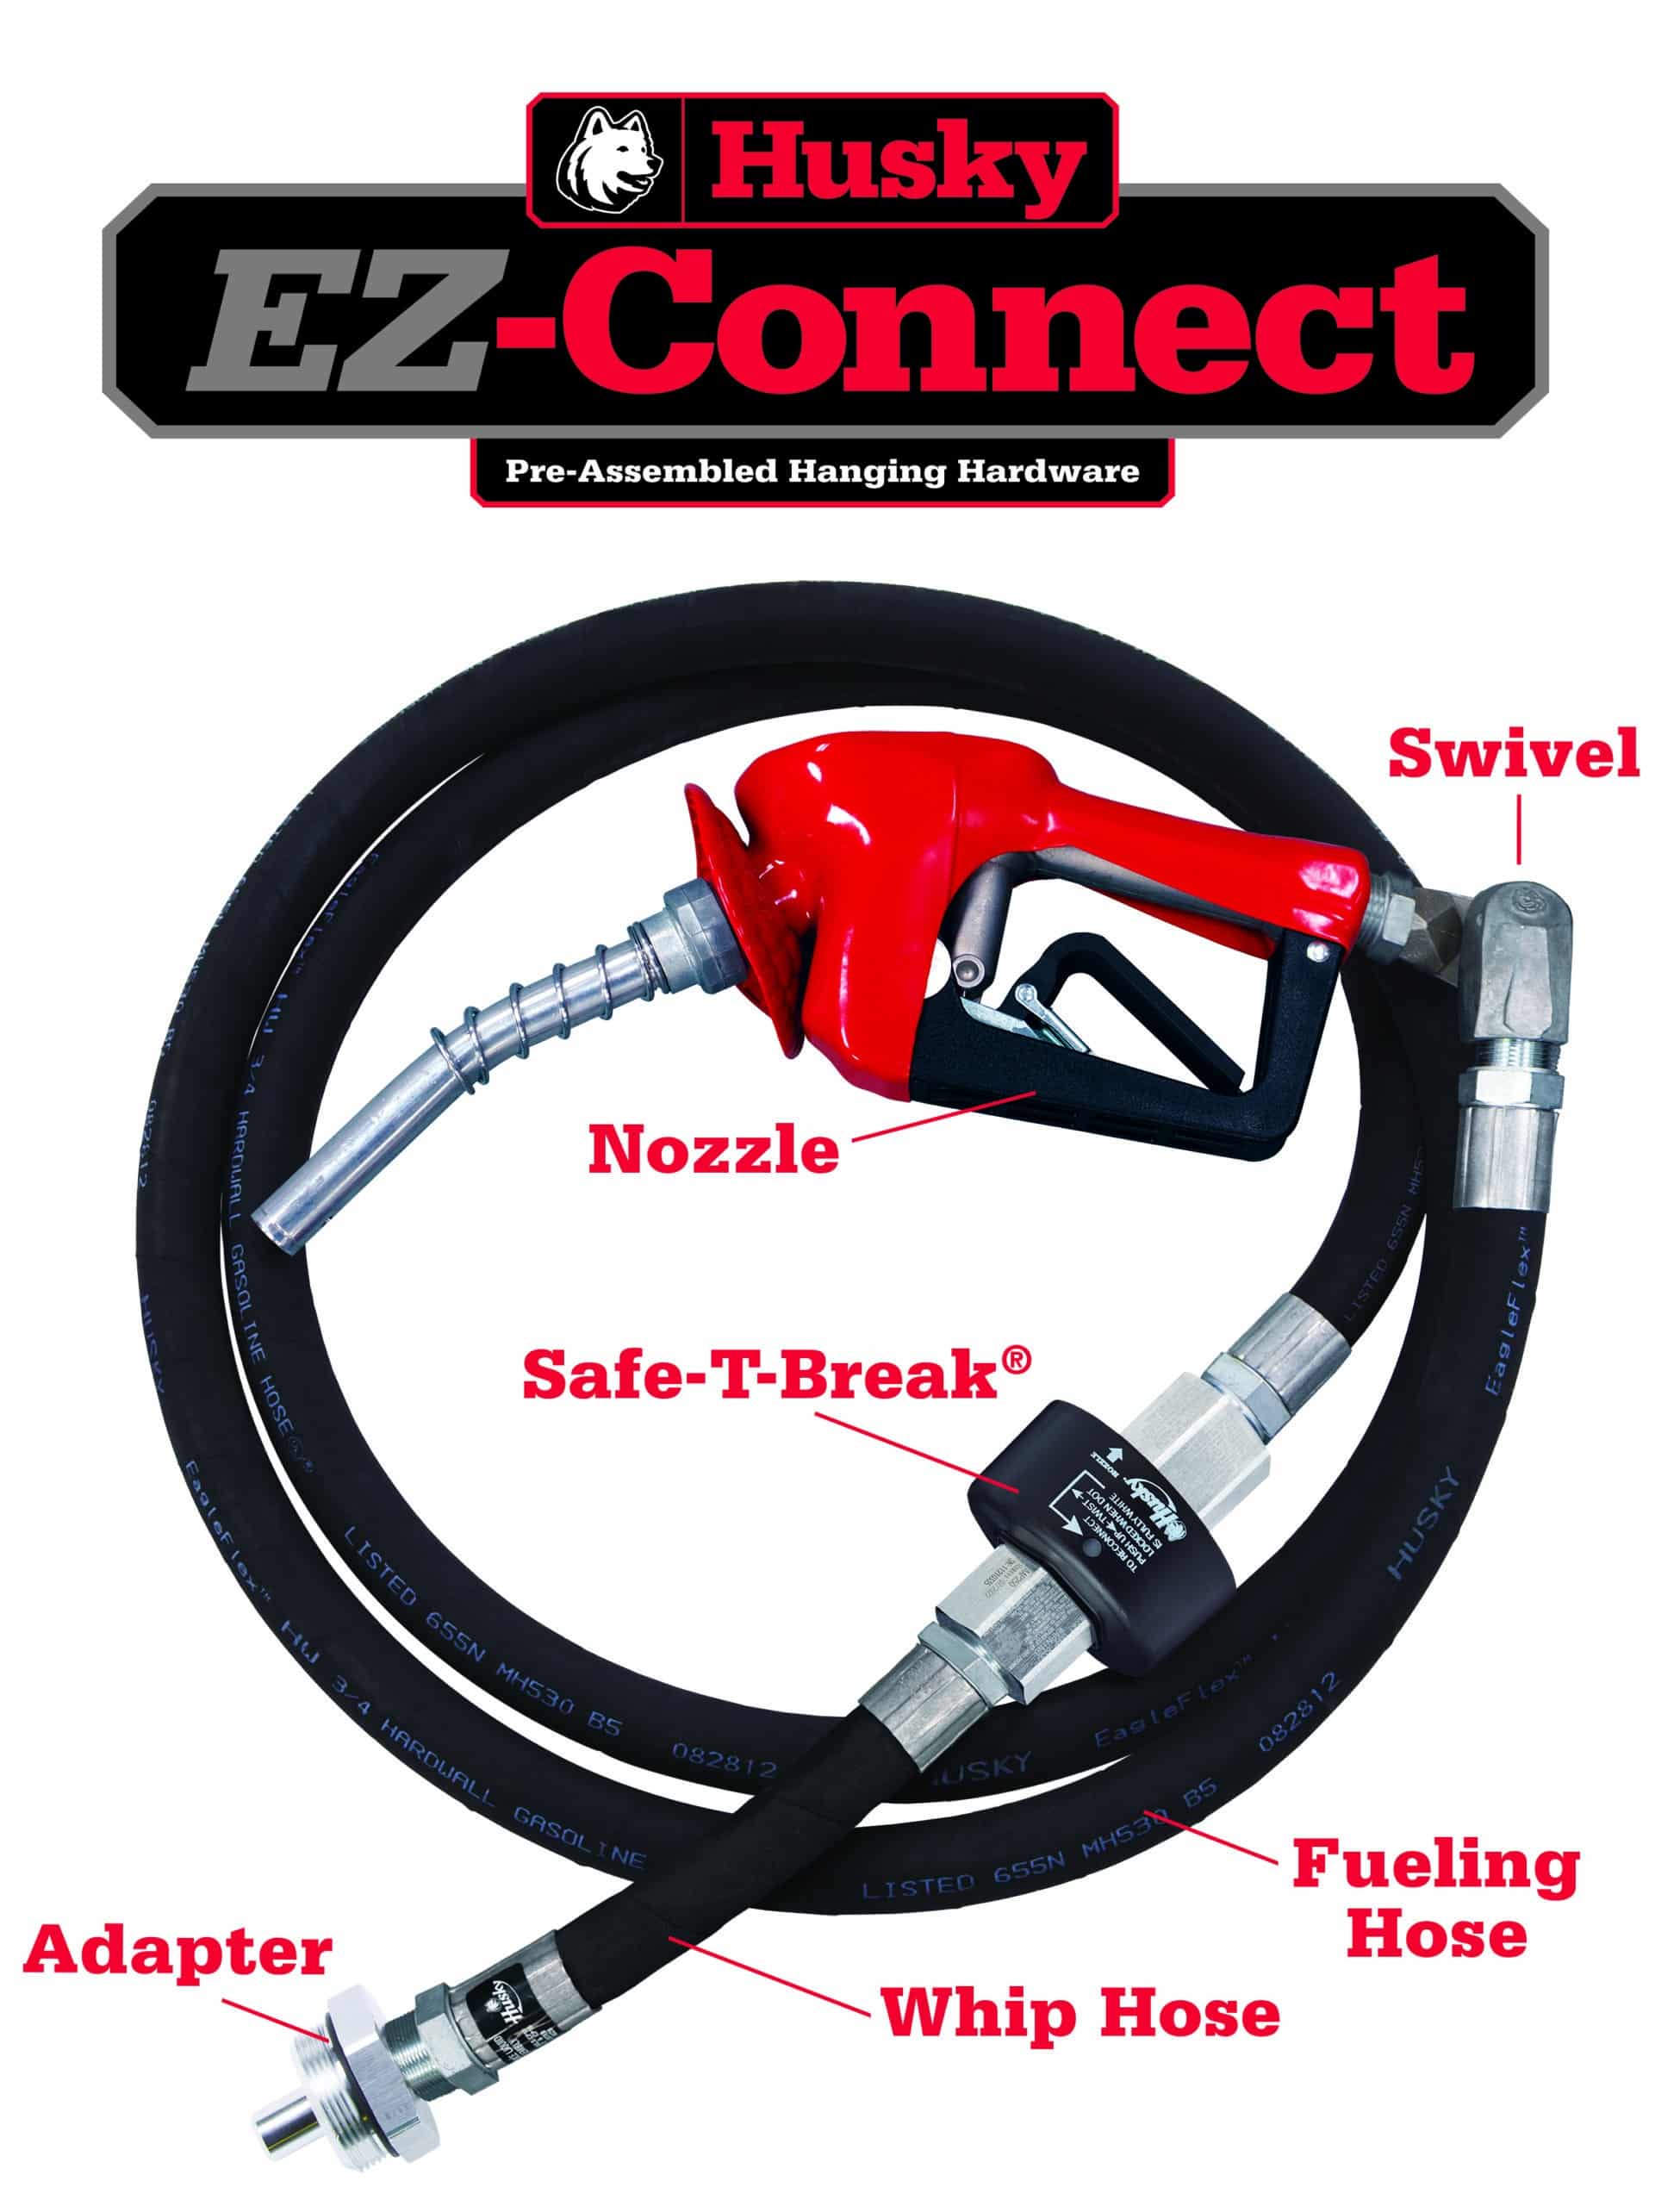 EZ Connect Wire Harness. Architectural Builders Hardware Mfg. Inc.